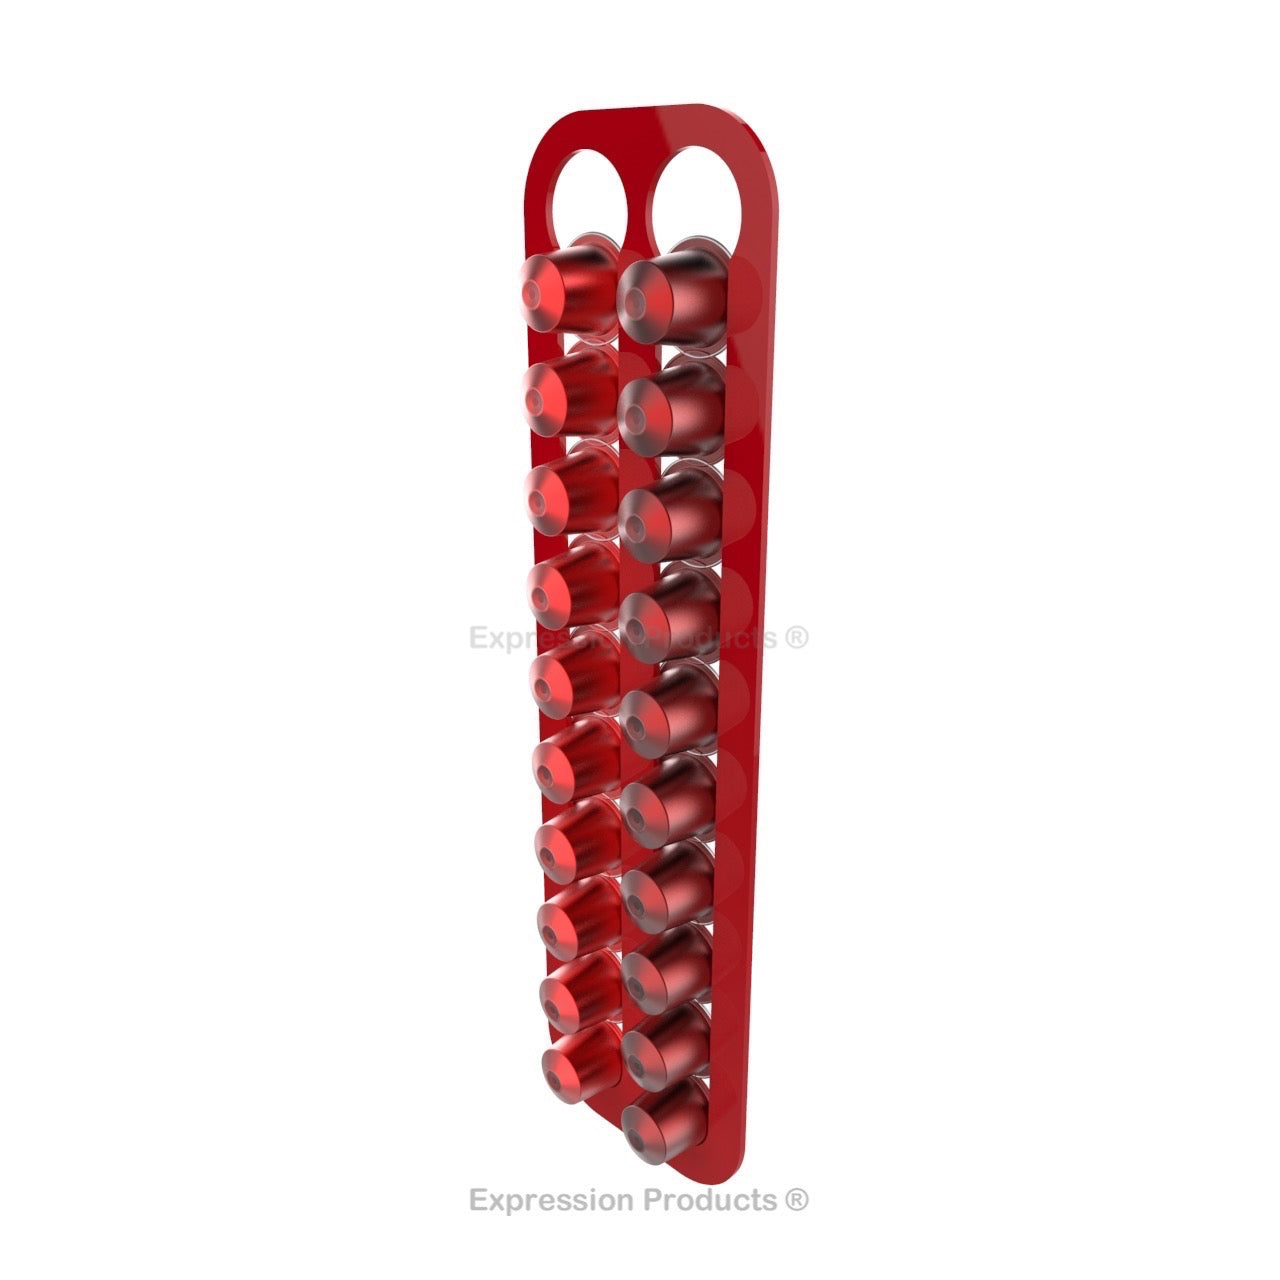 Magnetic Nespresso Original Line coffee pod holder shown in red holding 20 pods